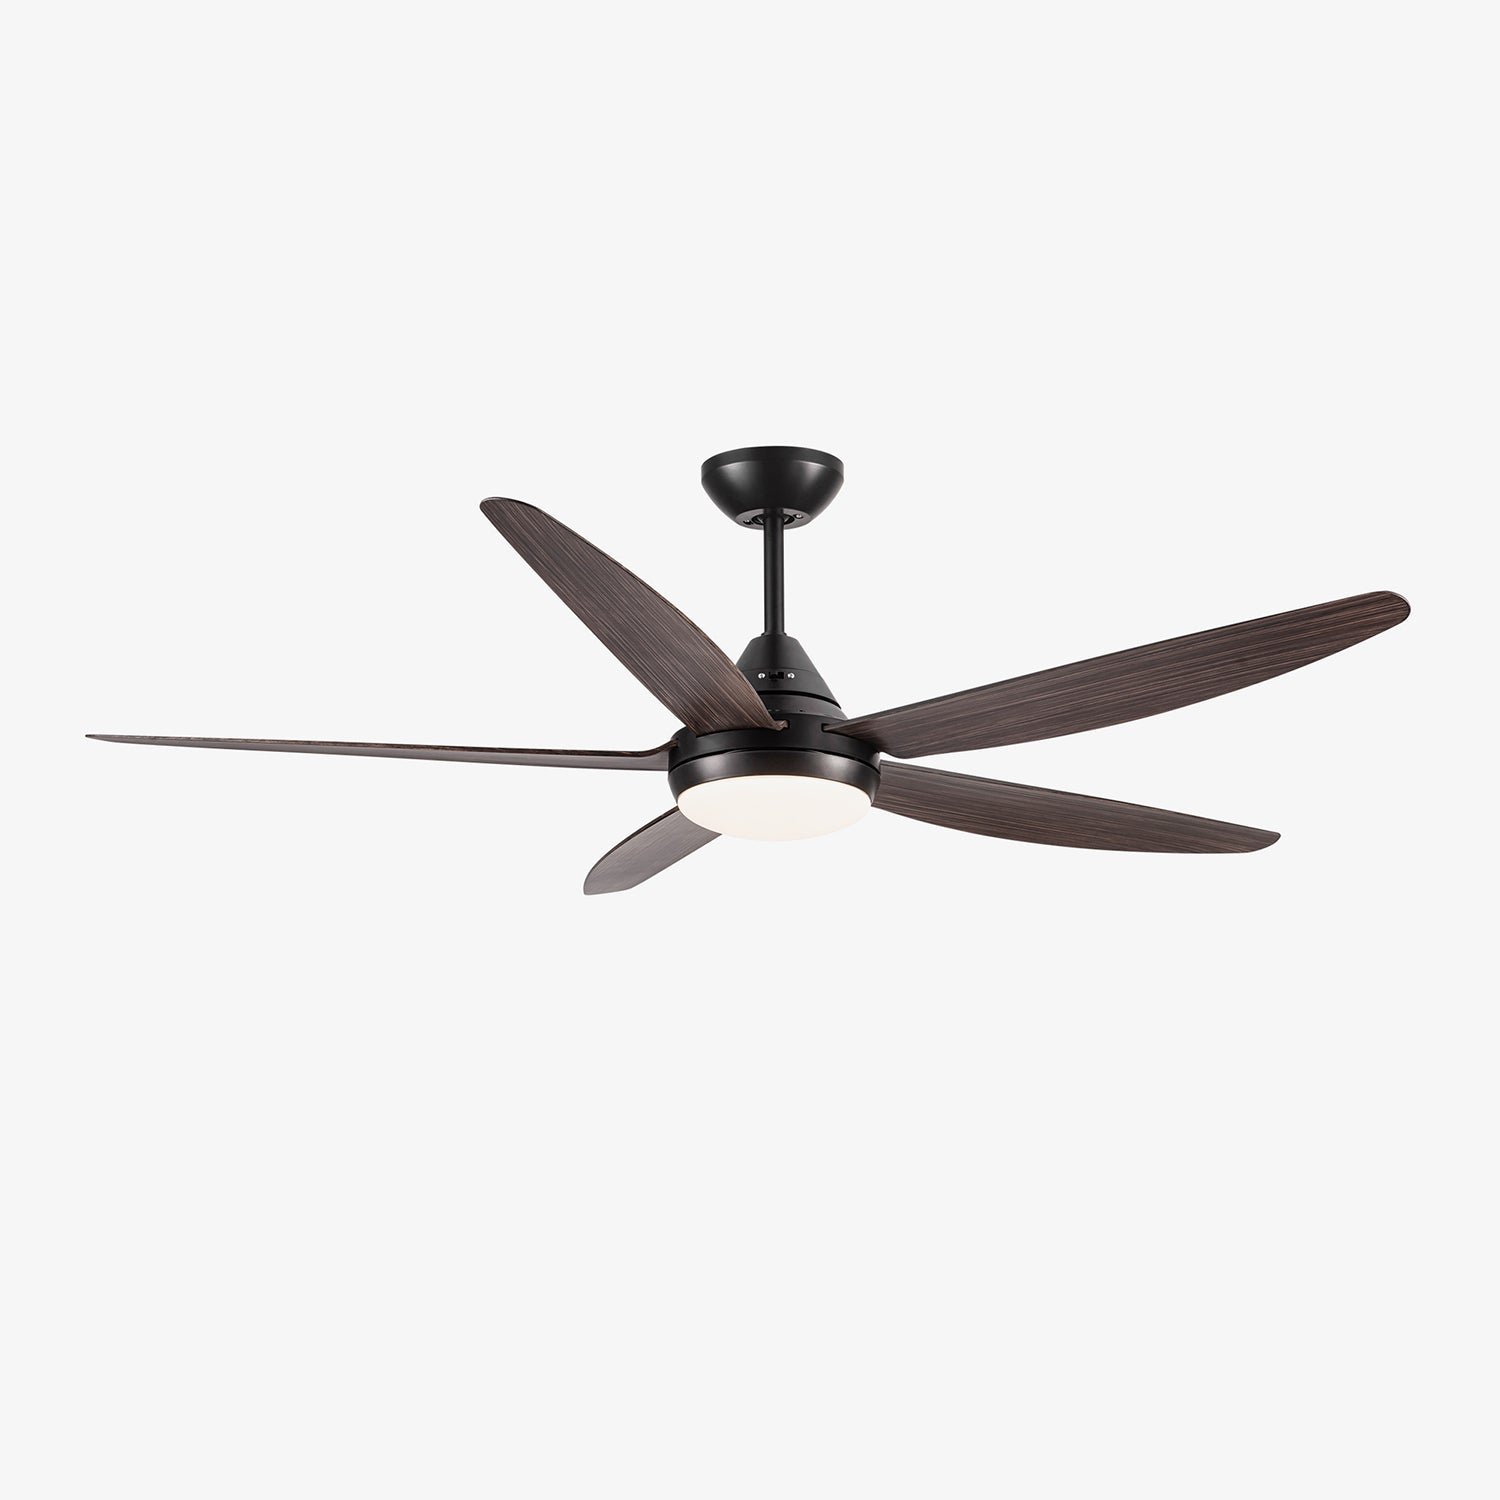 Ceiling Fan Light with ABS Blade, measuring 56″ in diameter and 13.8″ in height, in Black Brown color and operates on 110V.